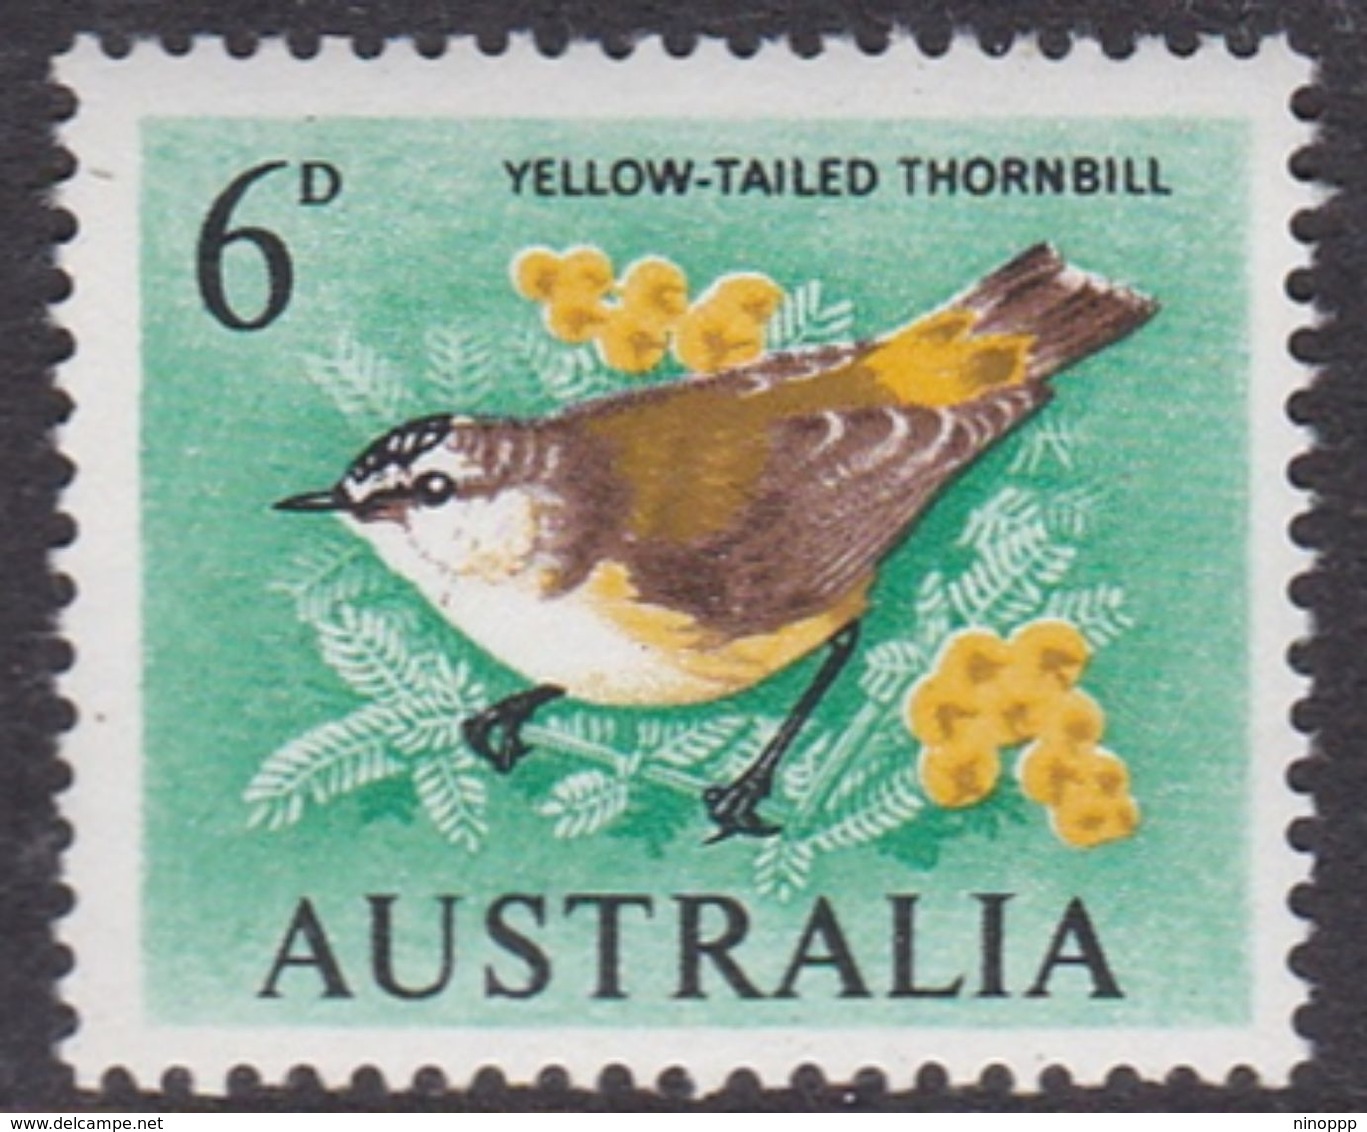 Australia ASC 396 1964 Birds 6d Thorbill, Helecon Paper, Mint Never Hinged - Prove & Ristampe